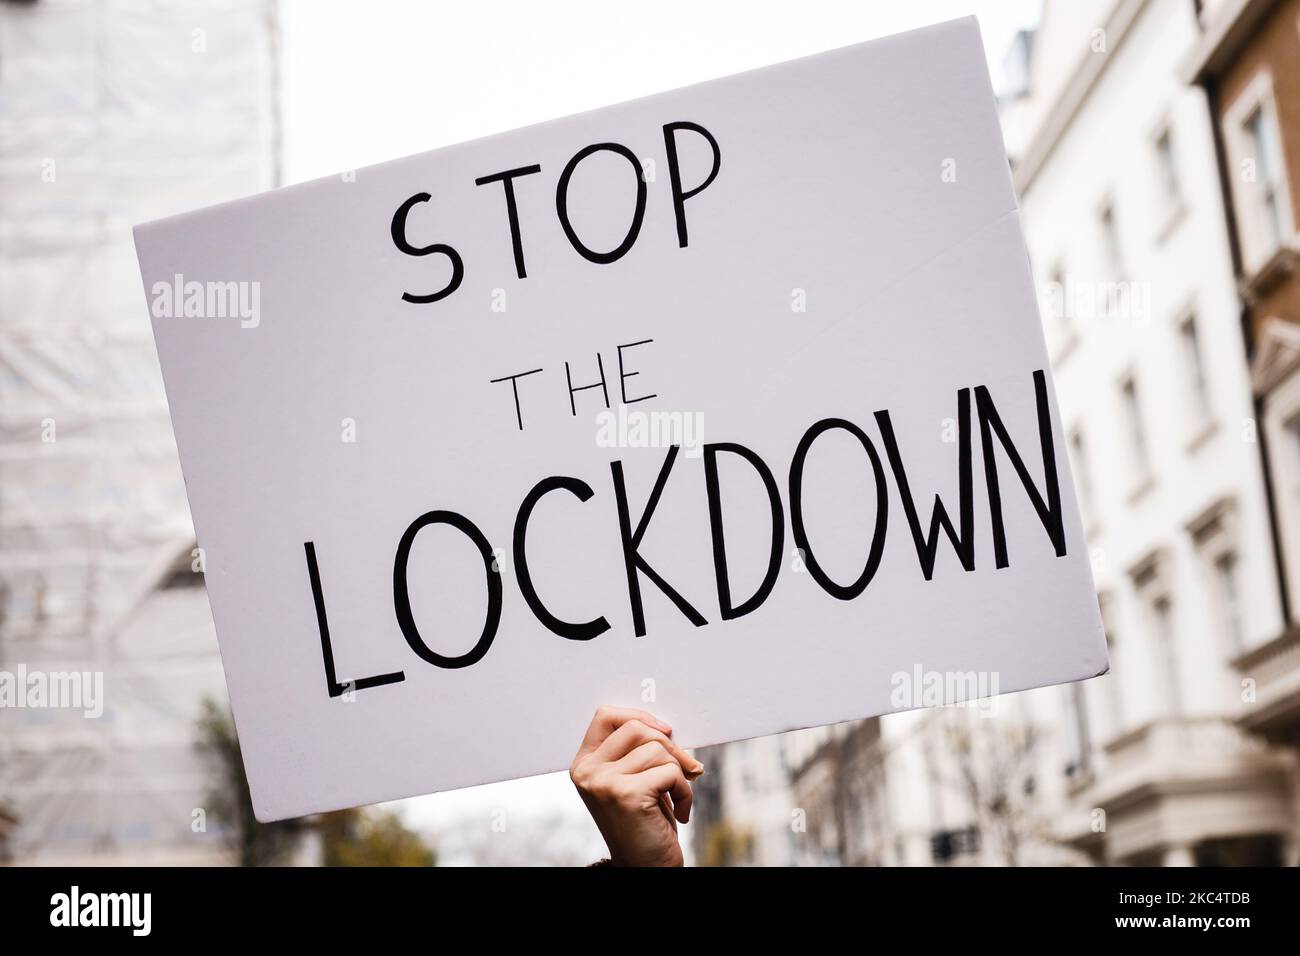 An anti-lockdown activist holds up a 'Stop The Lockdown' placard during a demonstration in London, England, on November 28, 2020. In an evening update the Metropolitan Police announced it had made 155 arrests over the course of the day's demonstrations, for offences including breaches of coronavirus regulations, assault on police and possession of drugs. London is to return to 'Tier 2' or 'high alert' covid-19 restrictions once the current England-wide coronavirus lockdown ends next Wednesday. All three of the tiers, assigned to local authorities across England, have been strengthened since th Stock Photo